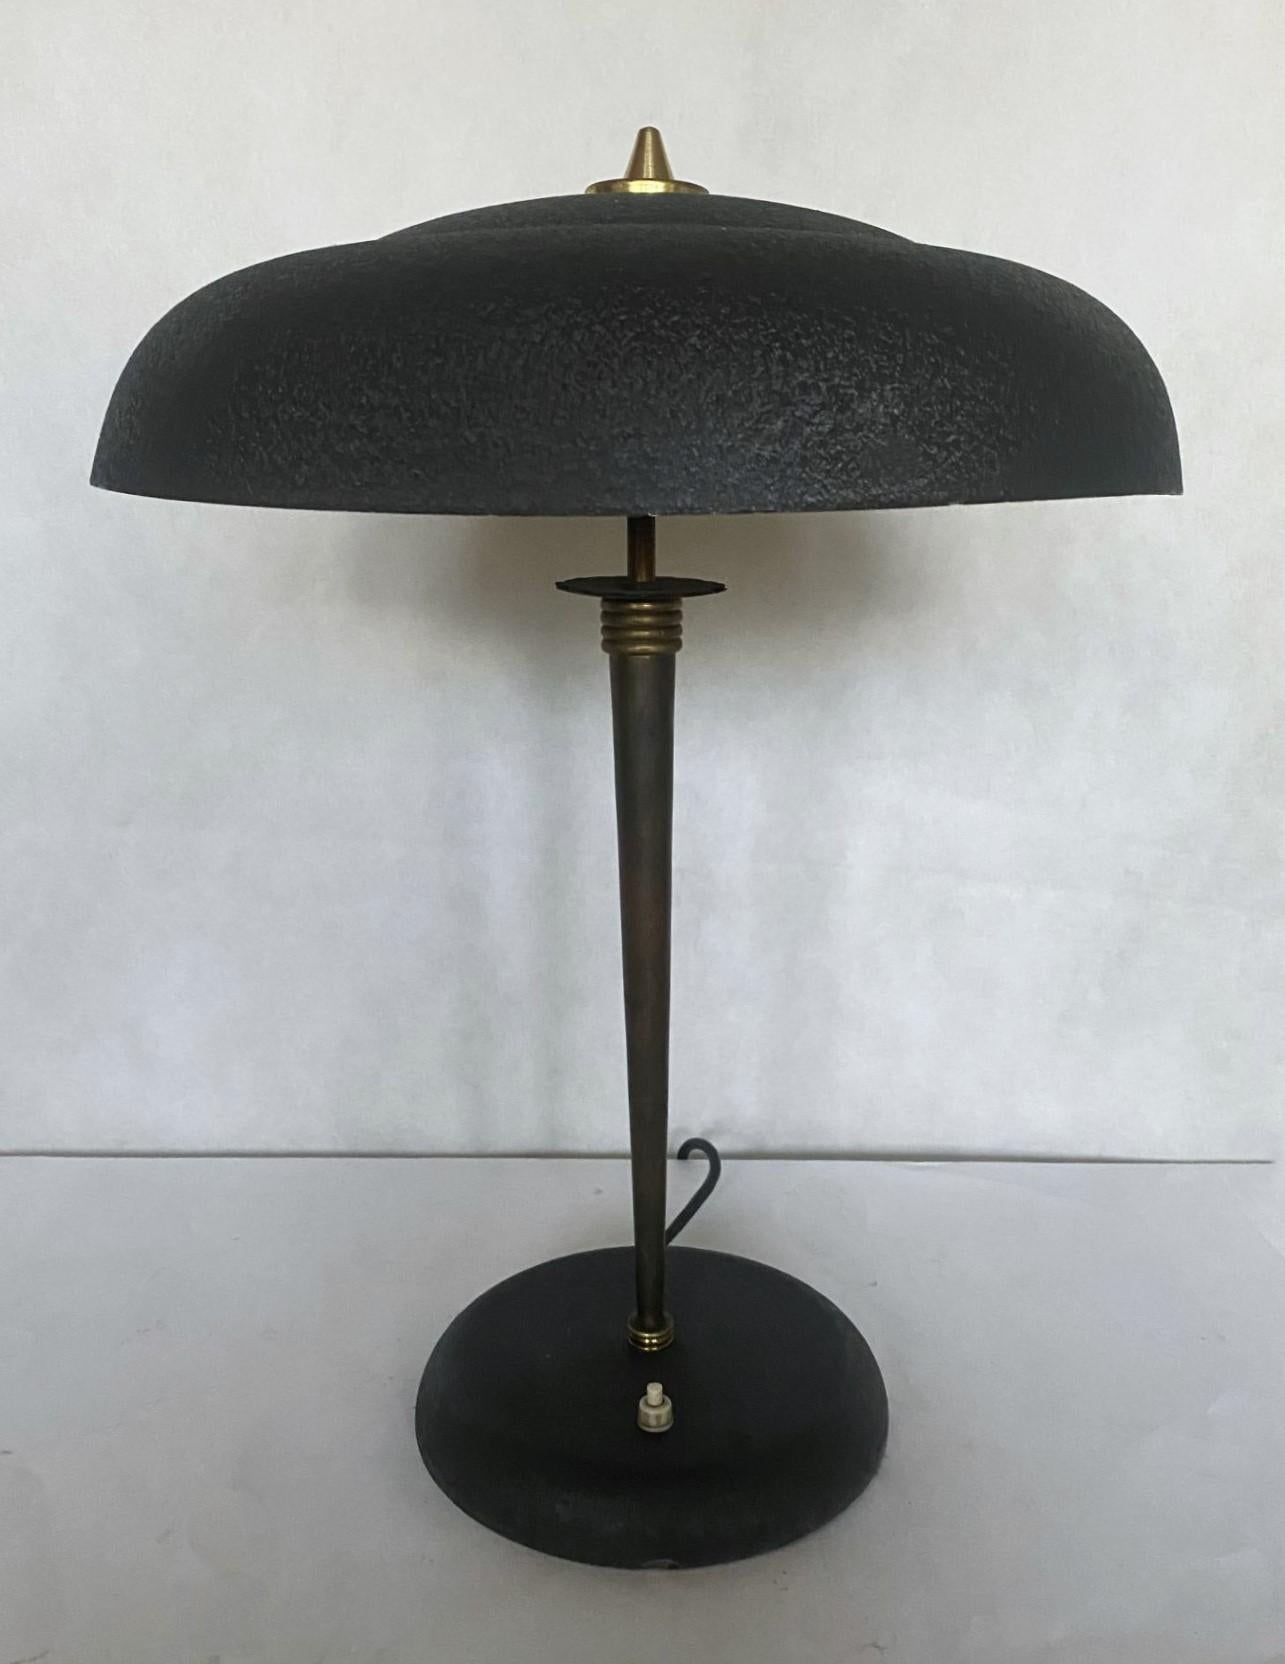 Midcentury Stilnovo two-light desk or table lamp in brass with black enameled metal base and shade (inside off-white), Italy, 1950s. Beautiful, minimalistic design and in very good vintage condition, with original pressure switch on the base, fully